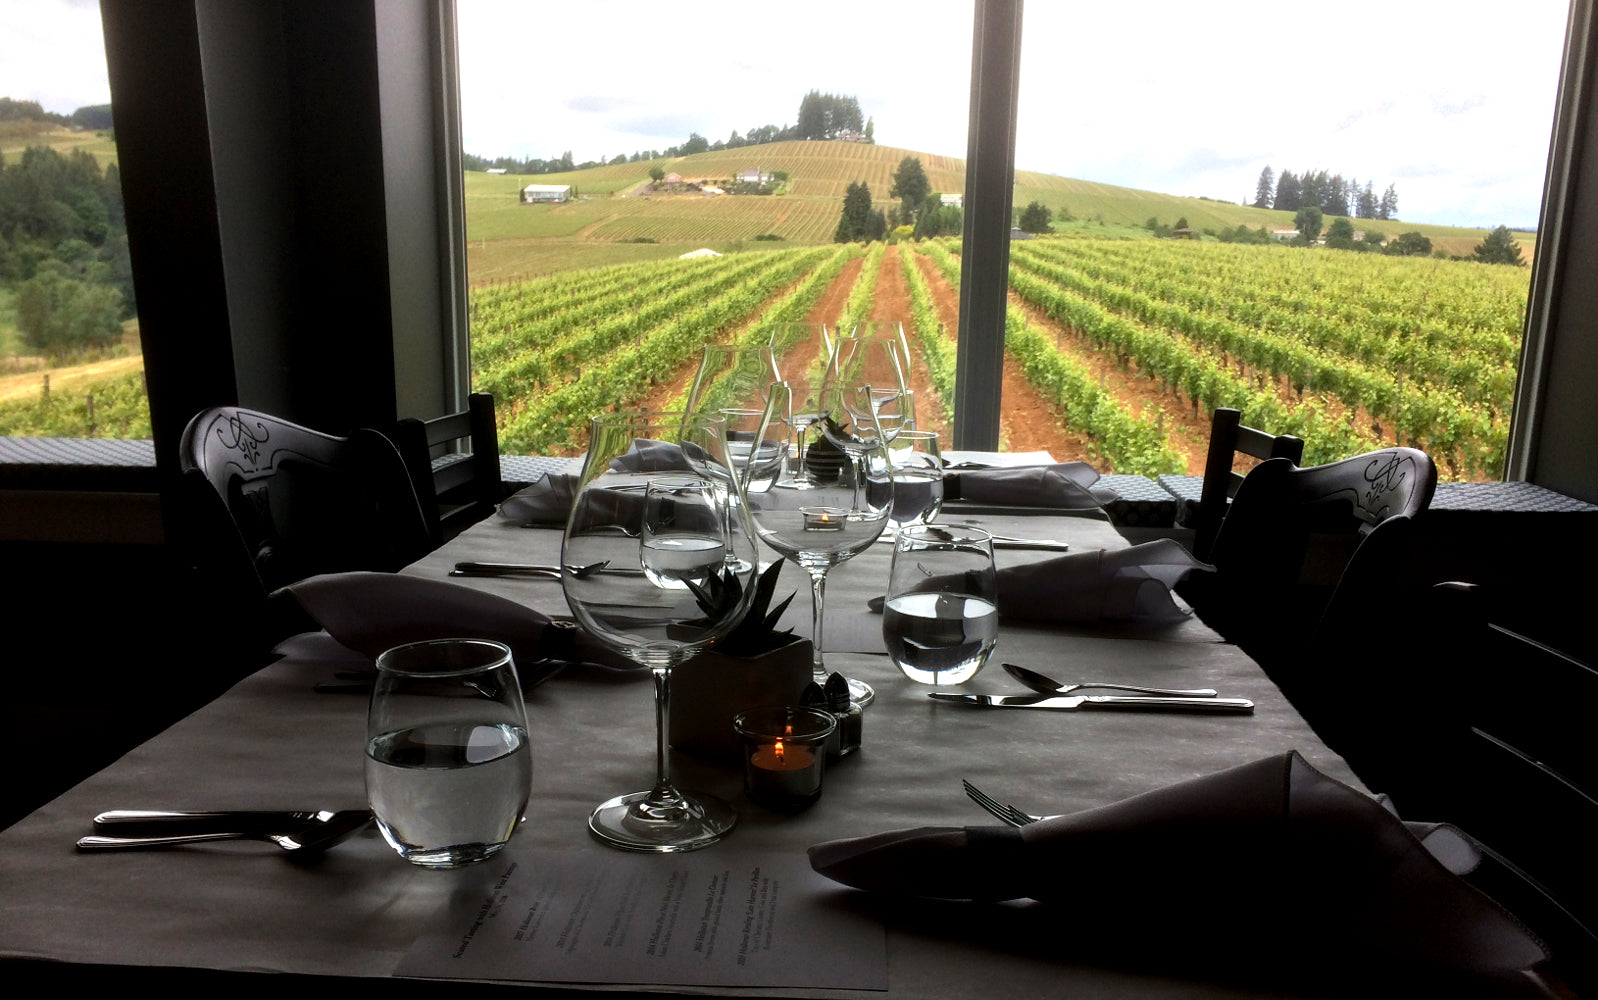 <b>Seated Tasting at the Winery</b>